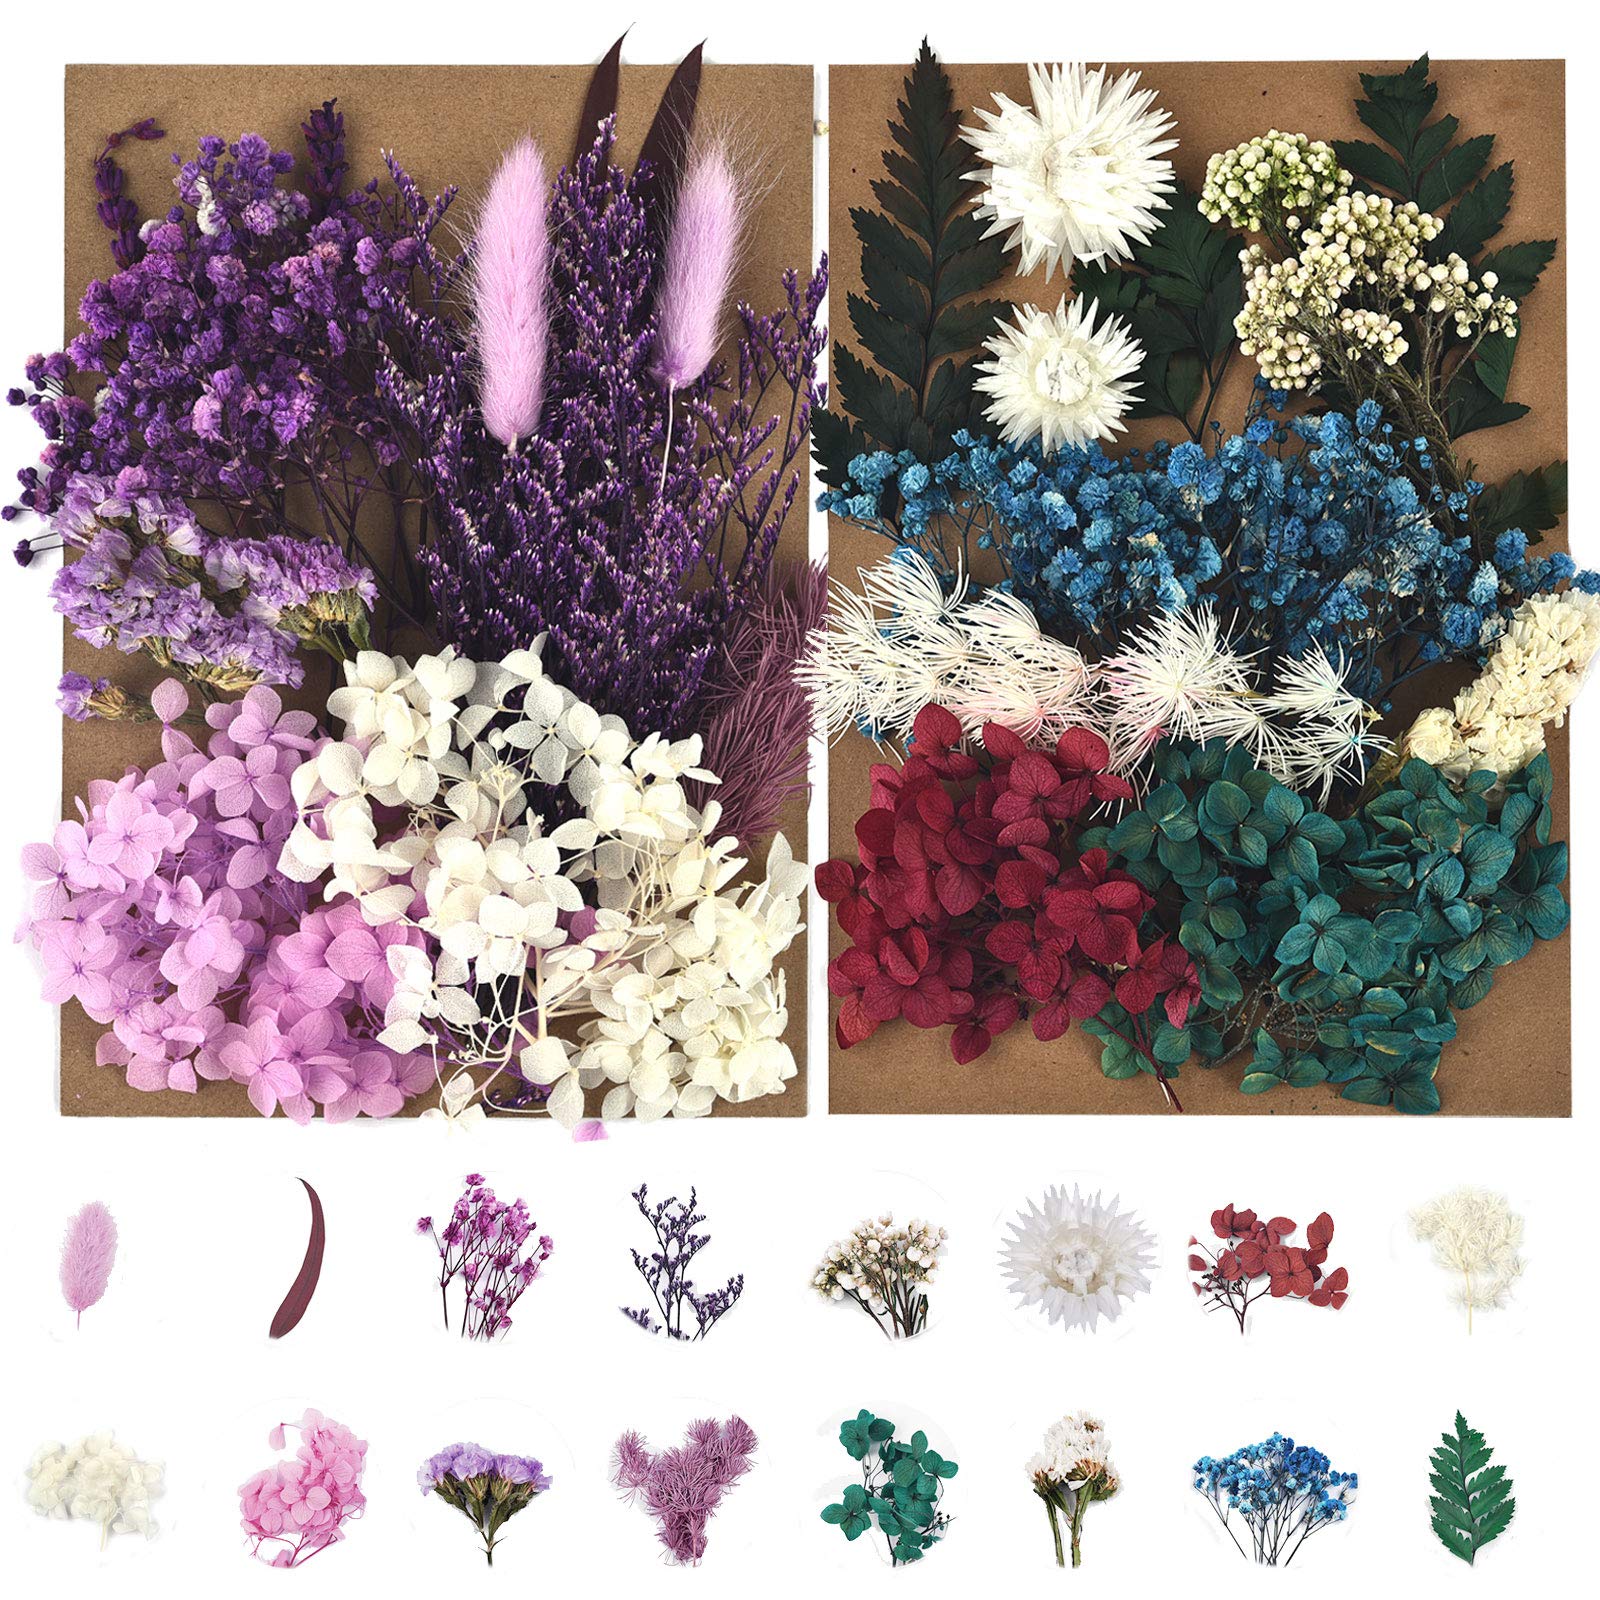  DALARAN 6 Pack Pressed Flowers for Candle Making DIY Dried  Flowers Multiple Natural Pressed Flowers Colorful Decorative Dried Flowers